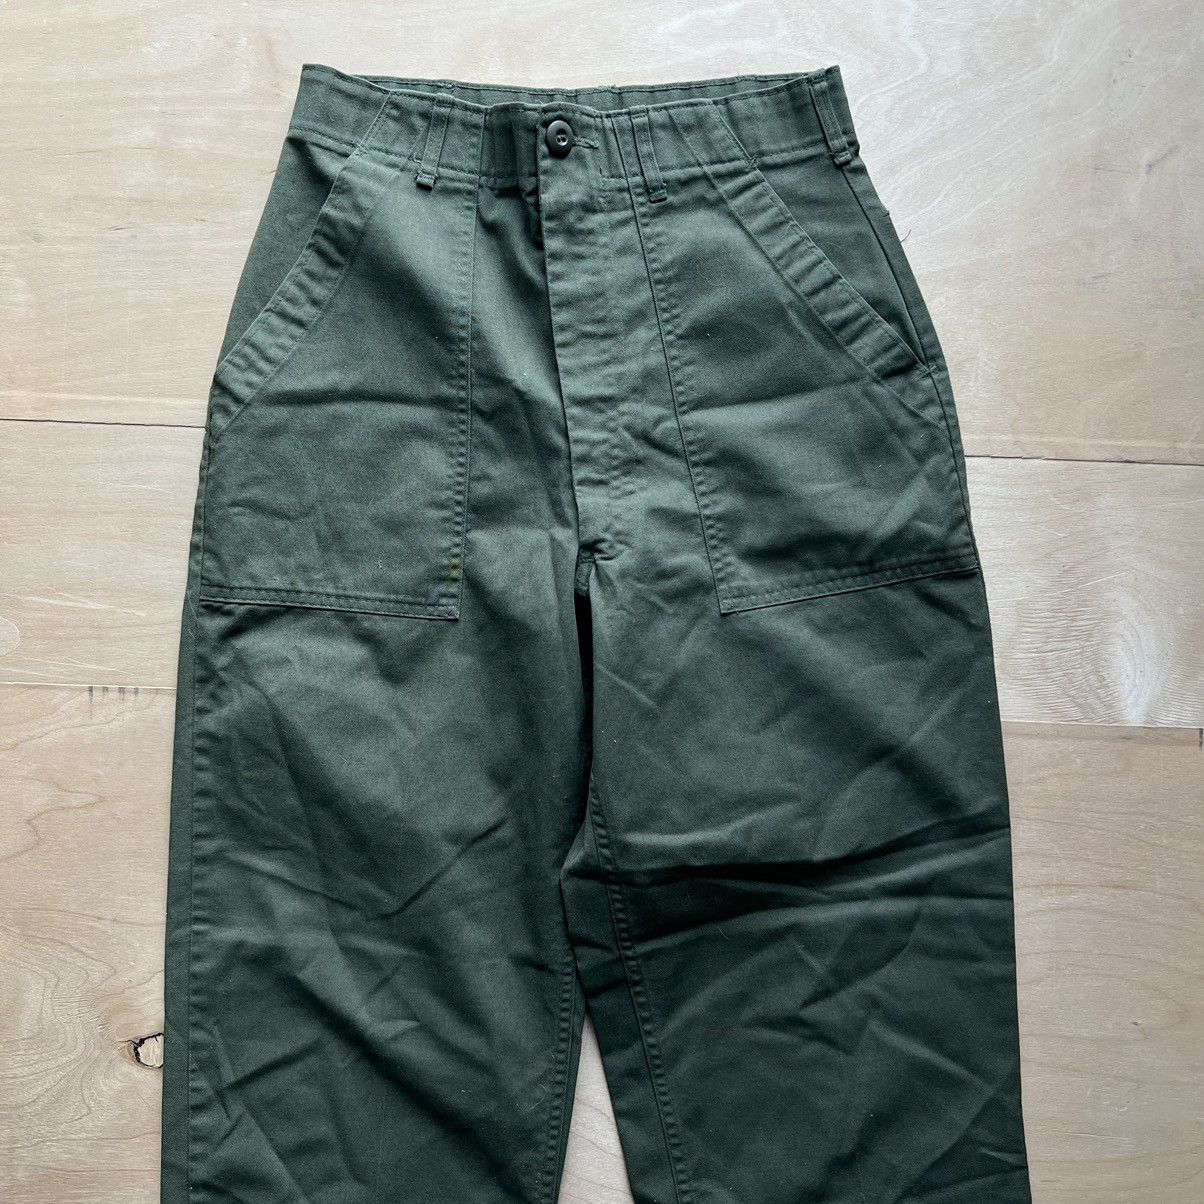 Vintage Vintage Military OG 507 Pants 26x28.5 Green Army Workwear Size US 26 / EU 42 - 2 Preview